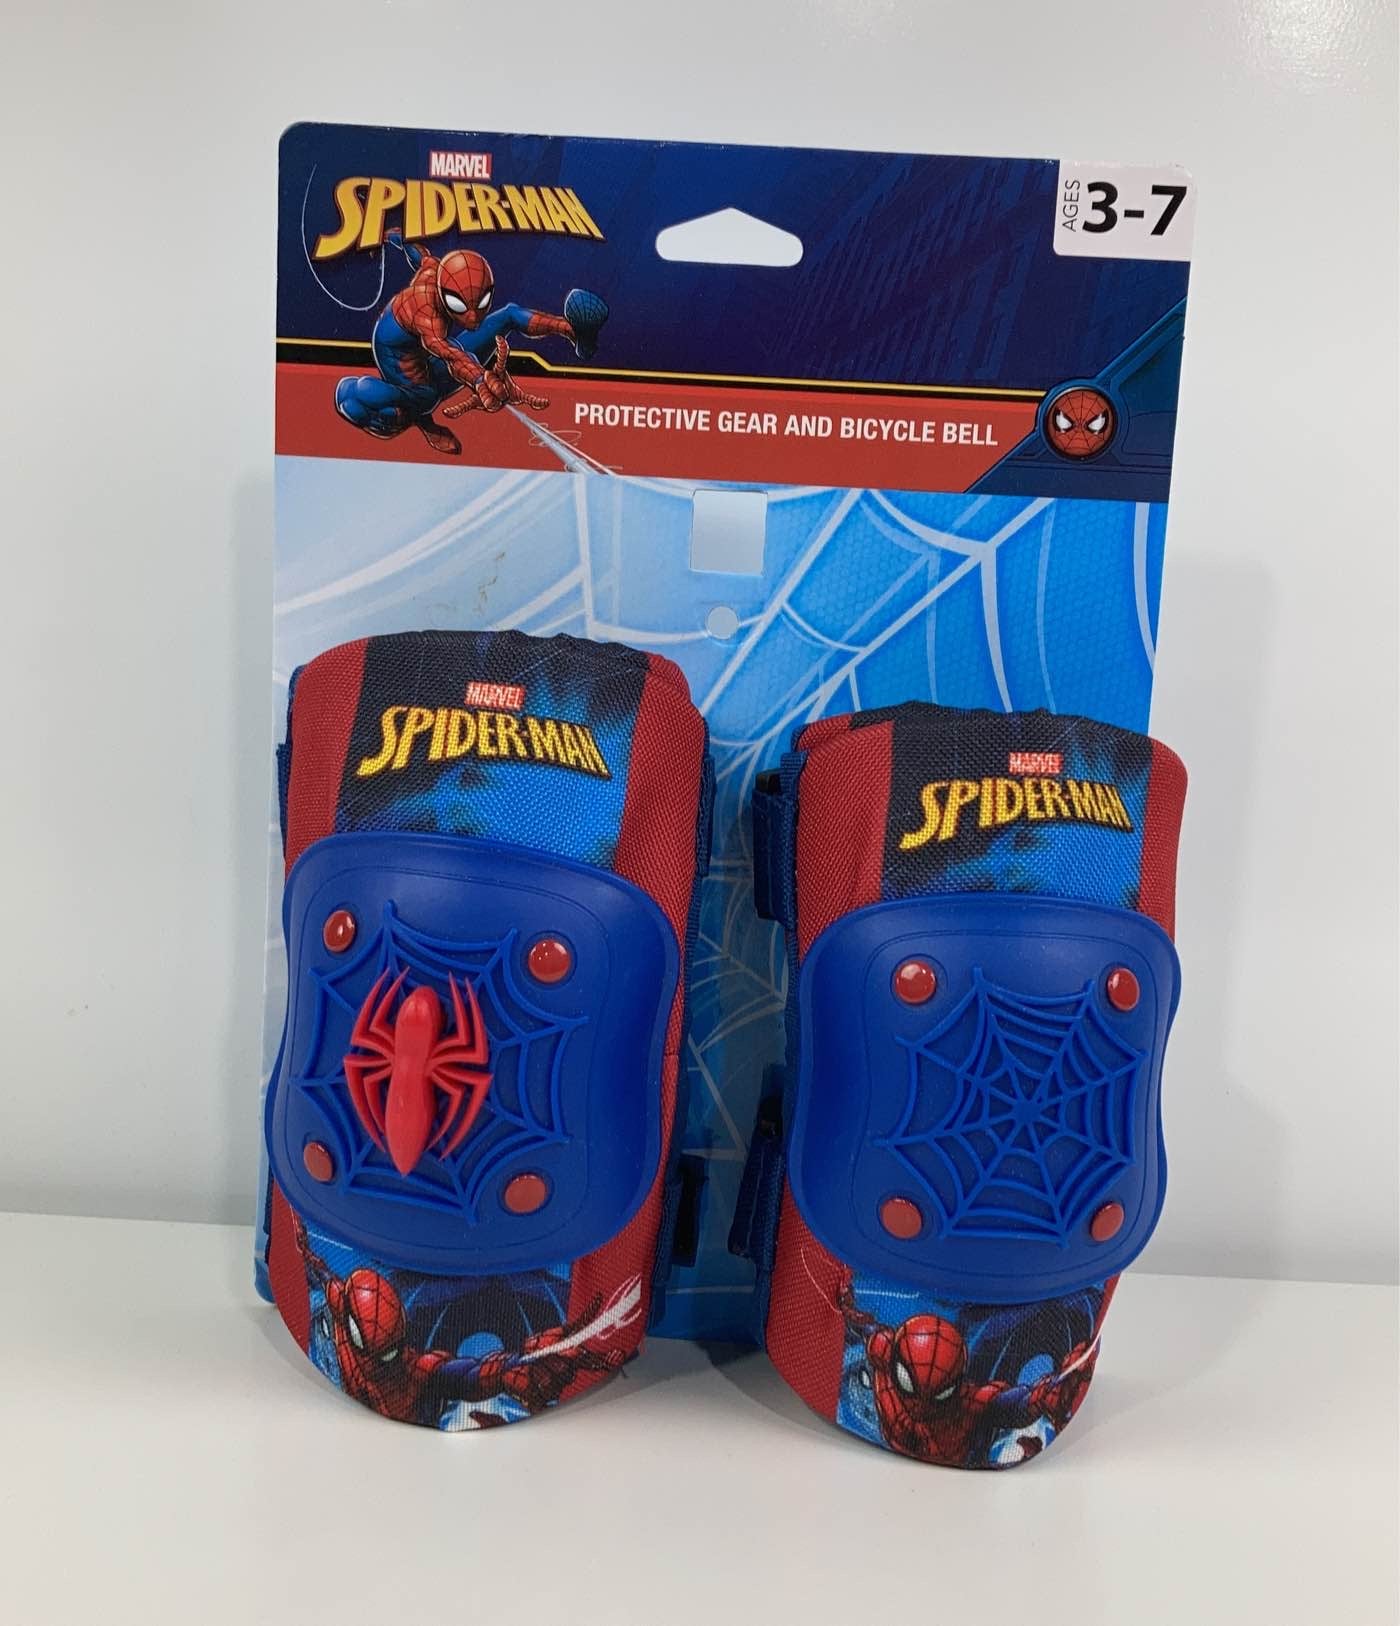 Spider-Man Child's Knee & Elbow Pads BELL protective gear nice